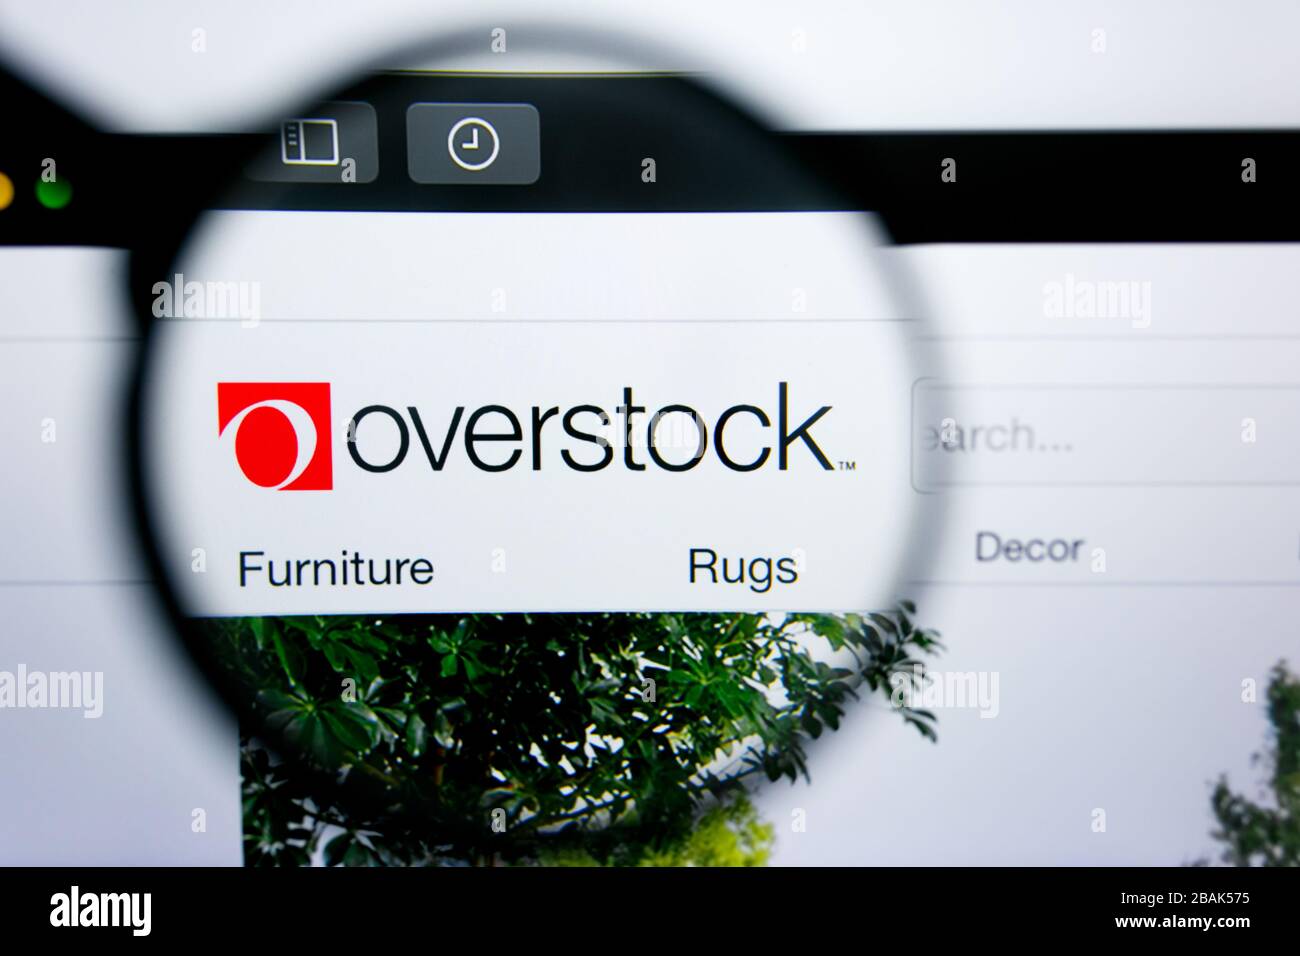 Los Angeles, California, USA - 25 June 2019: Illustrative Editorial of Overstock website homepage. Overstock logo visible on display screen. Stock Photo